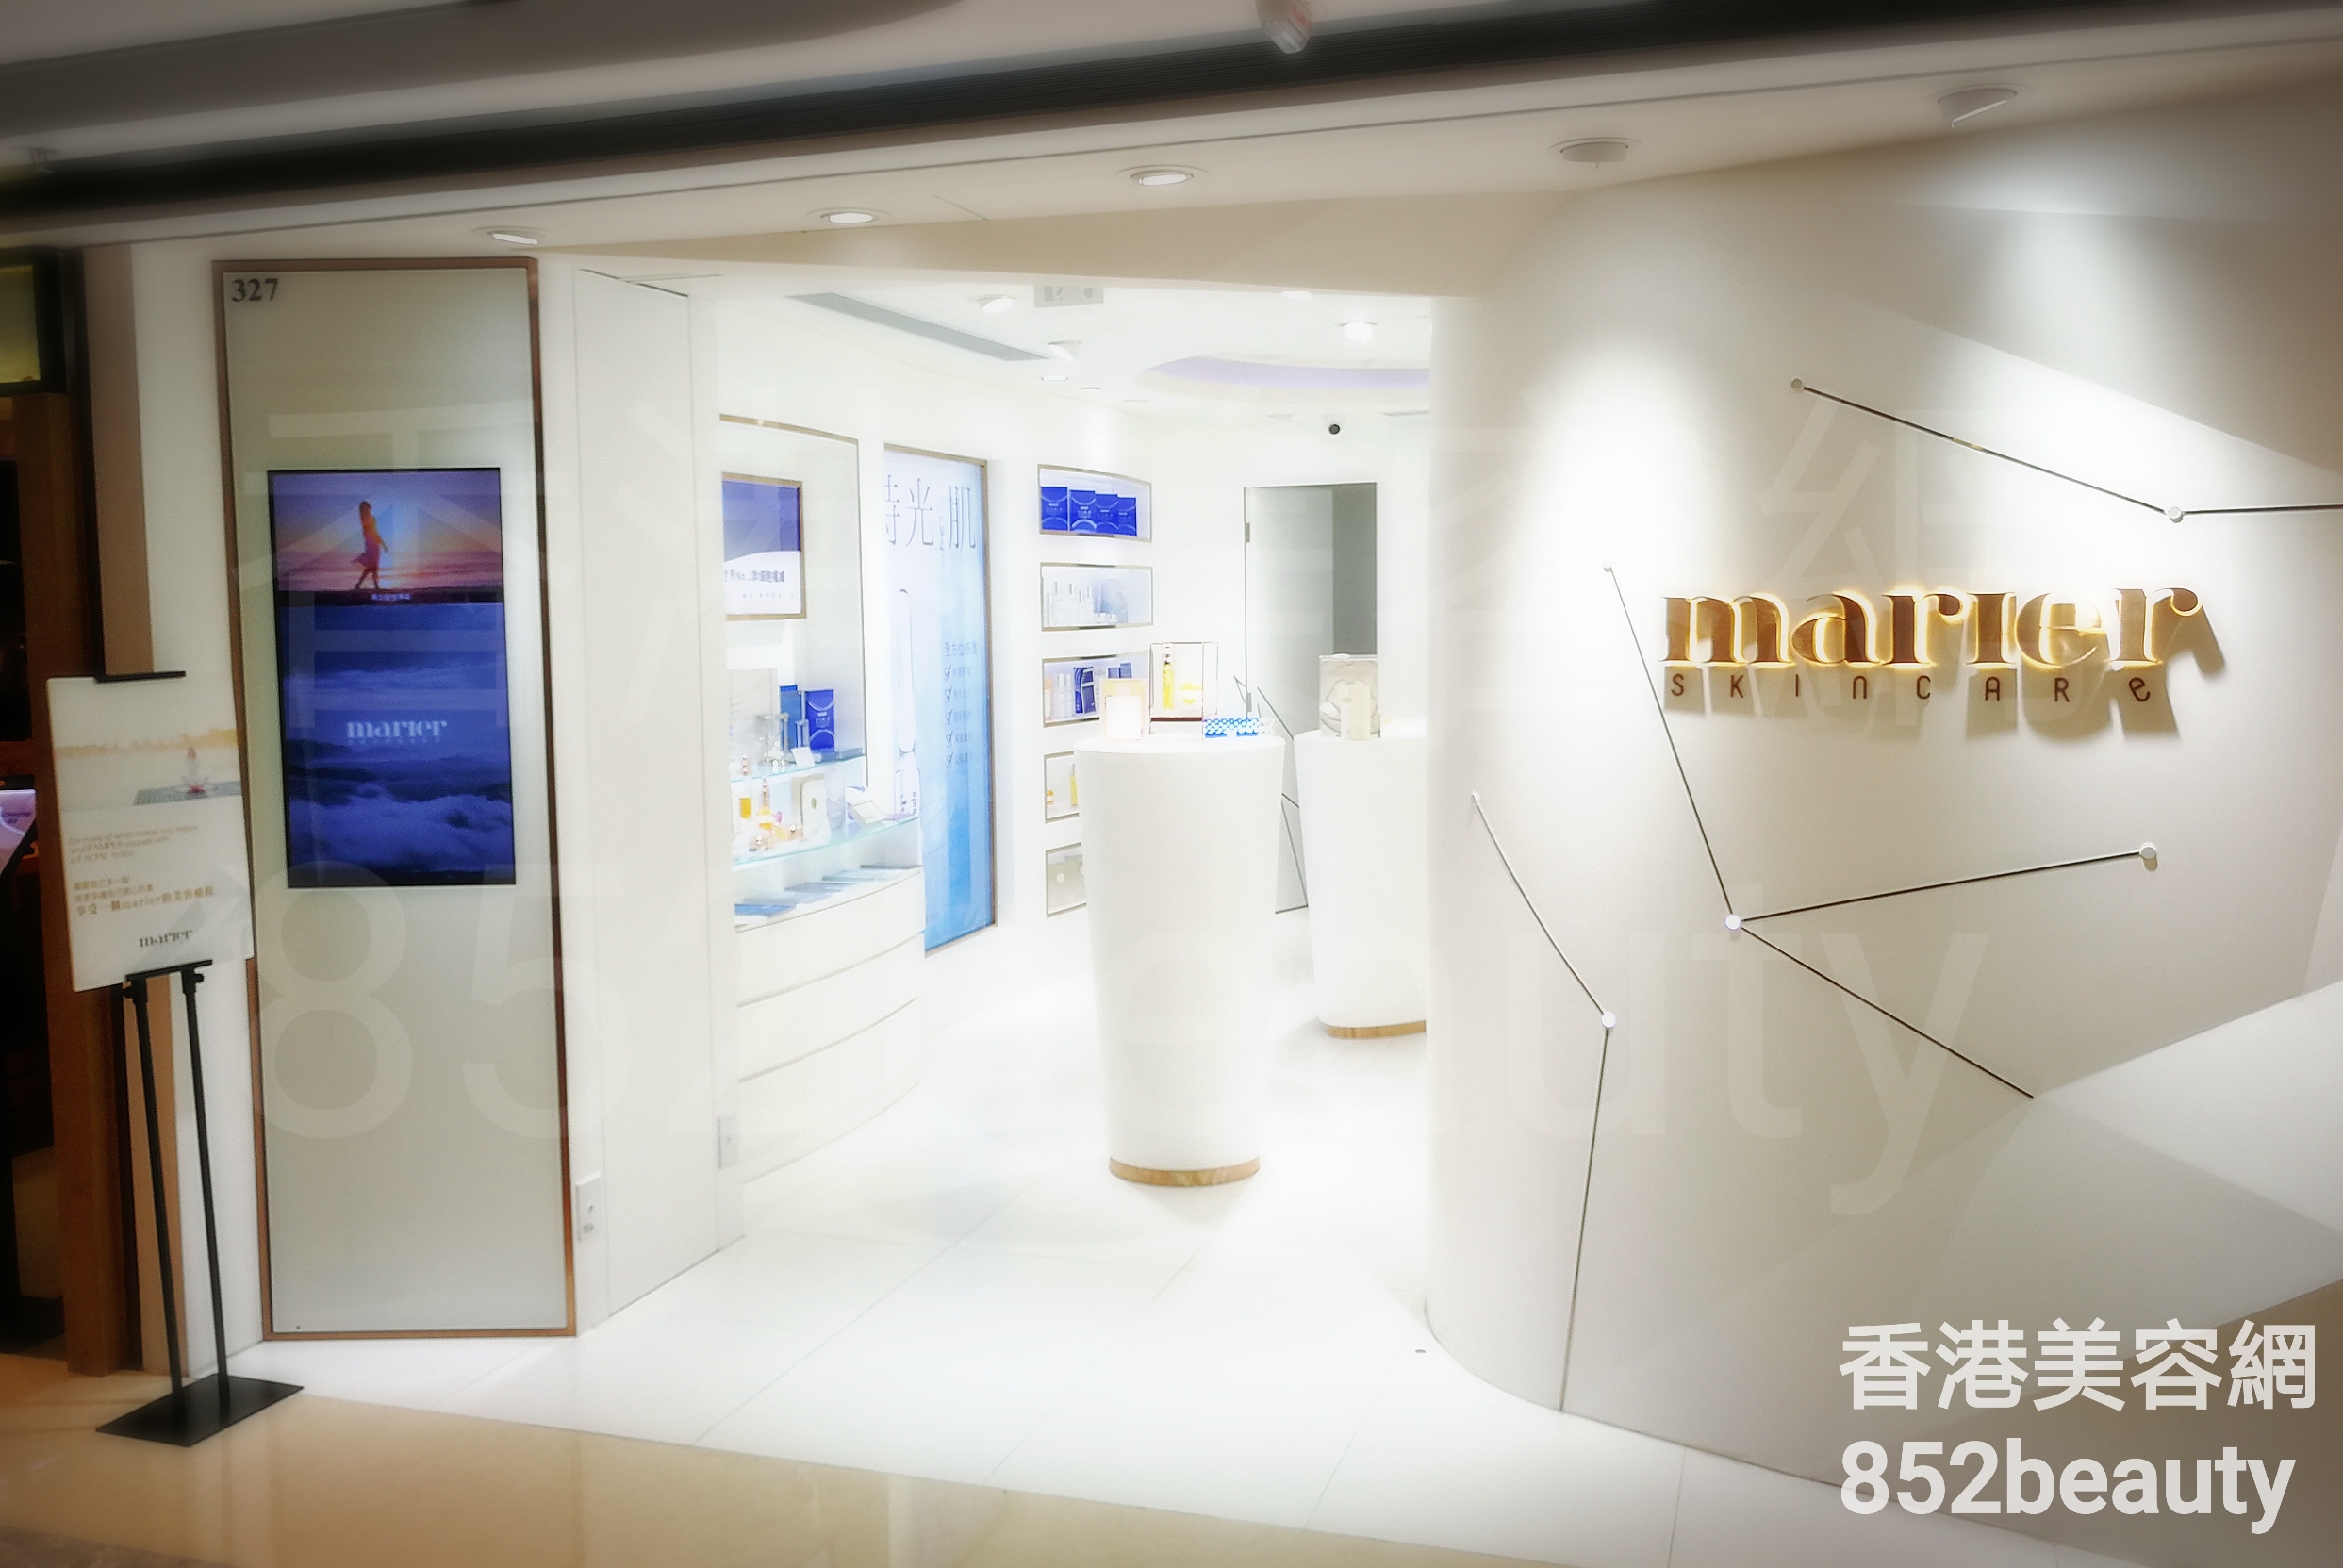 Hair Removal: marier Skincare (葵芳店)